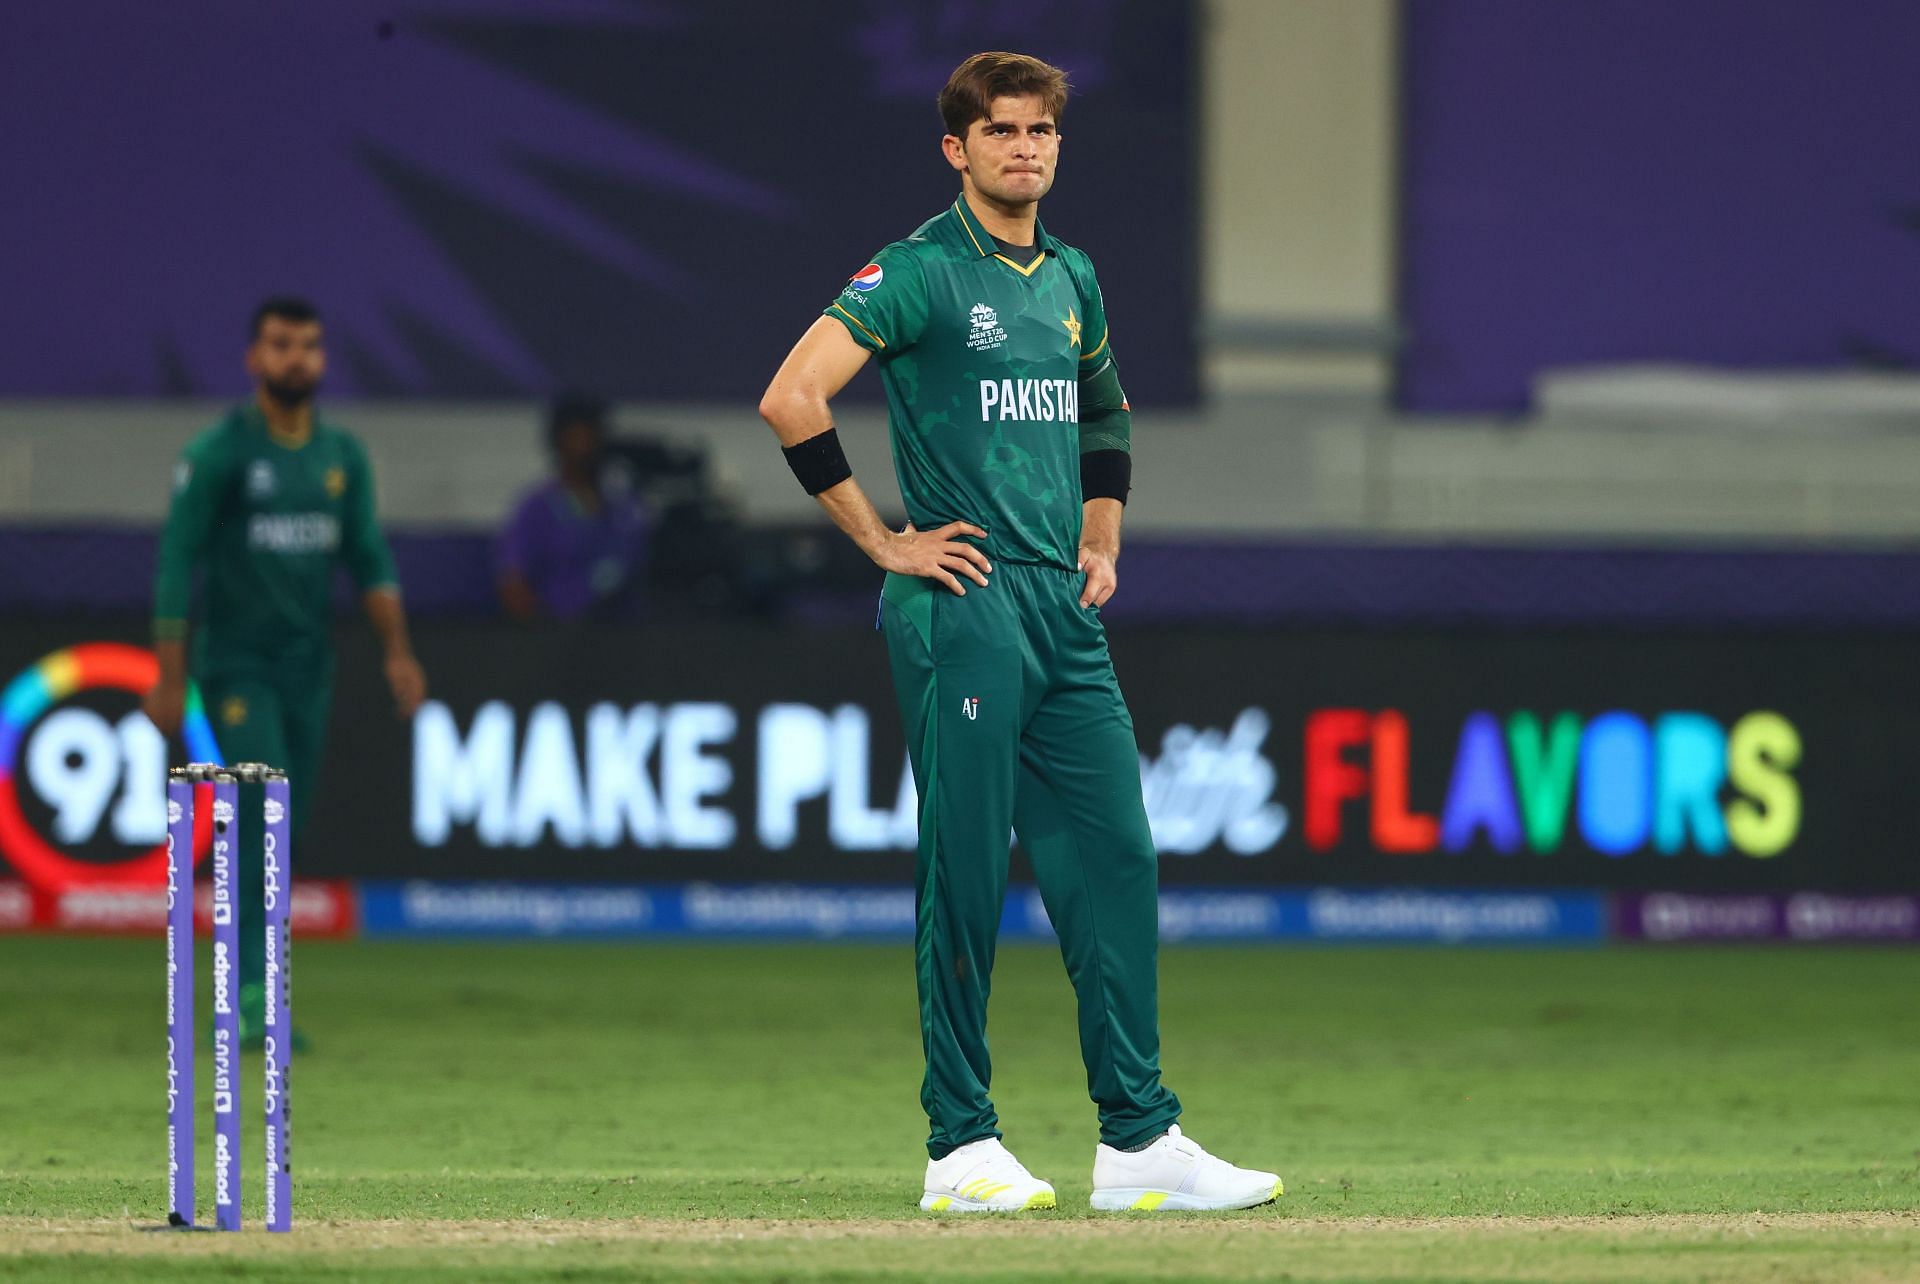 Shaheen Afridi was adjudged as player of the match for his exploits against India